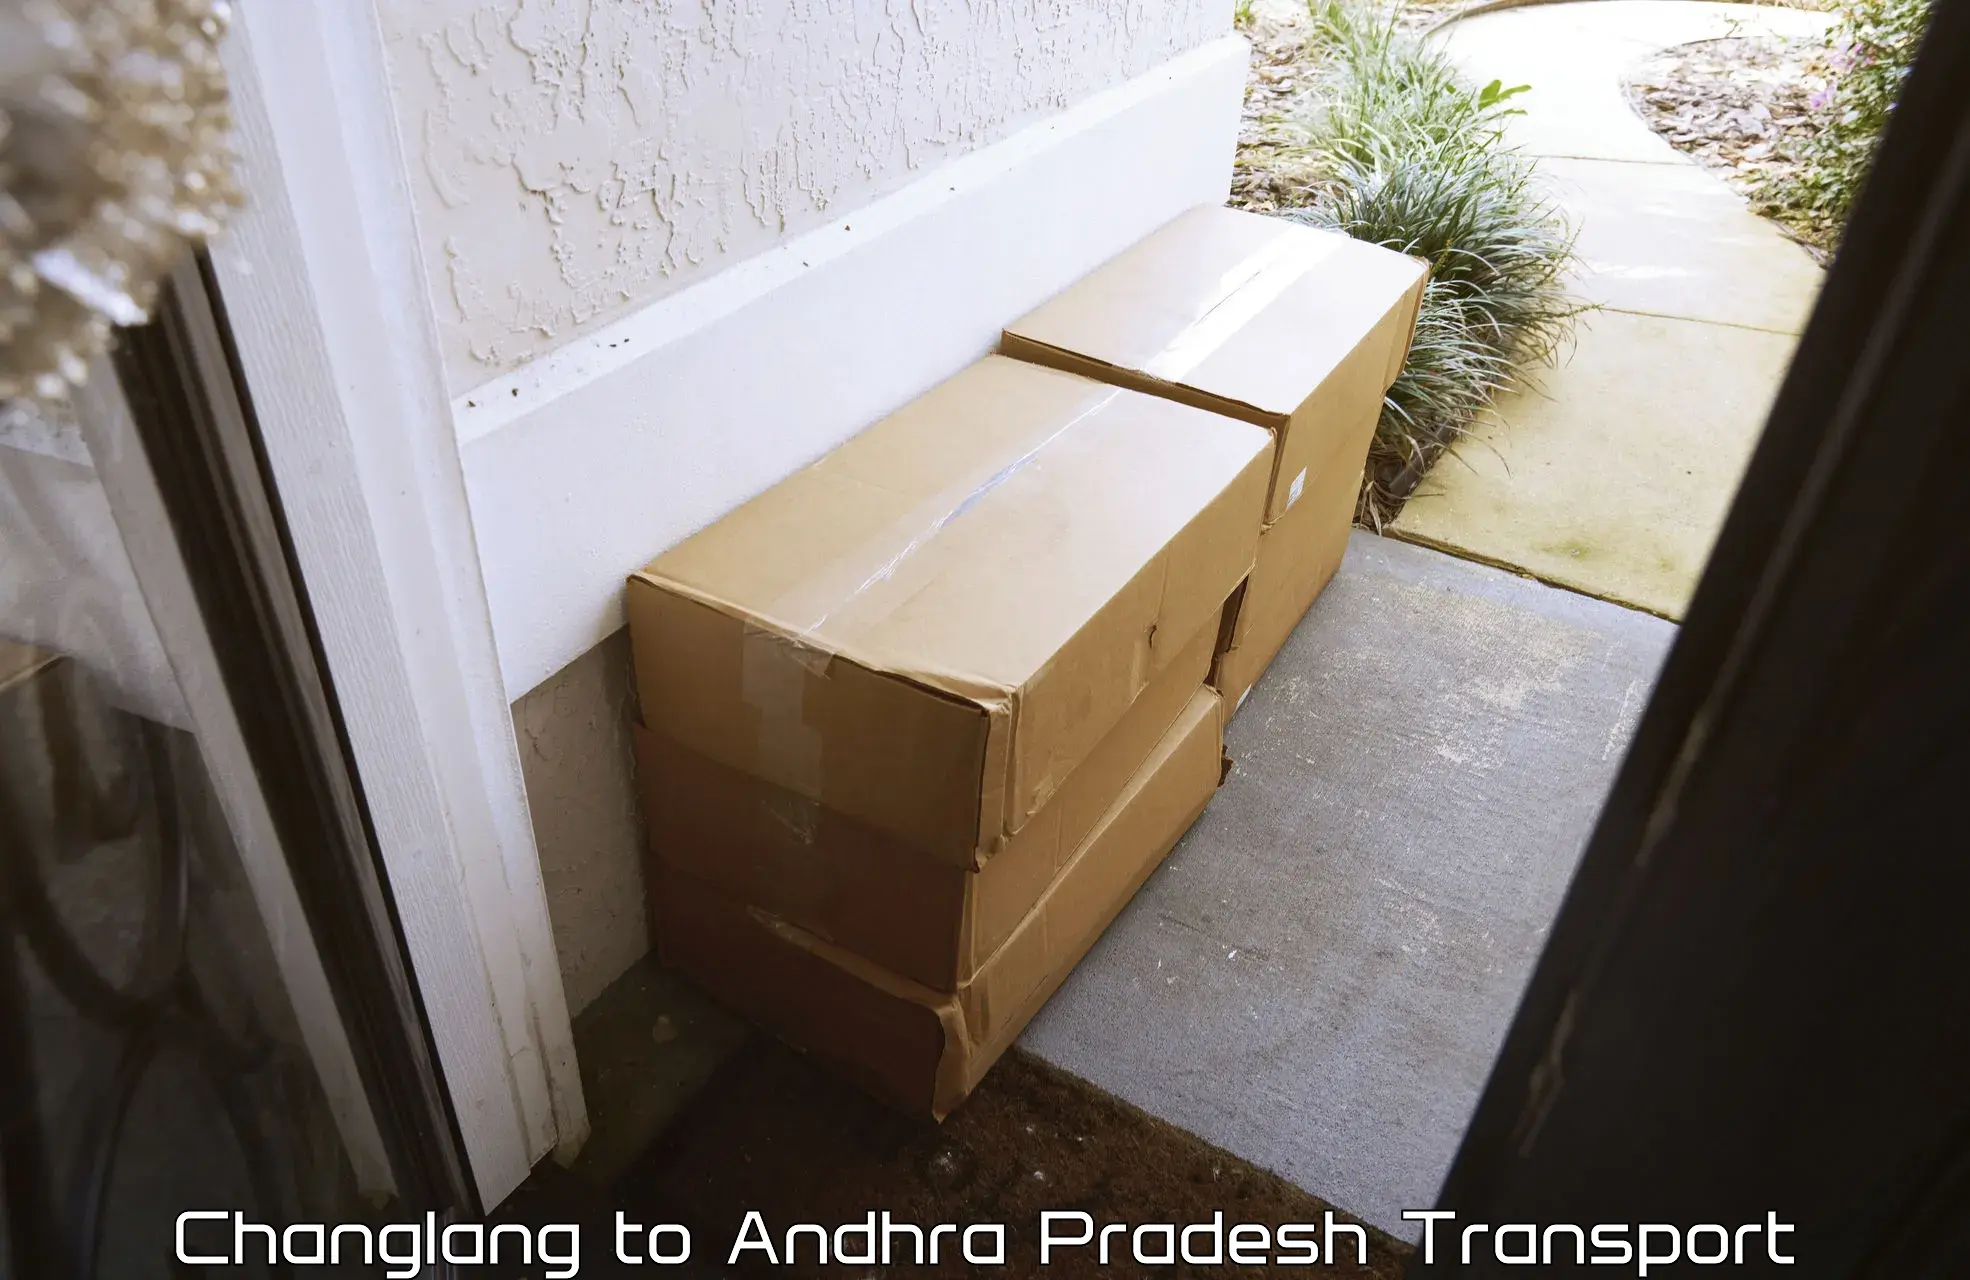 Truck transport companies in India Changlang to Andhra Pradesh